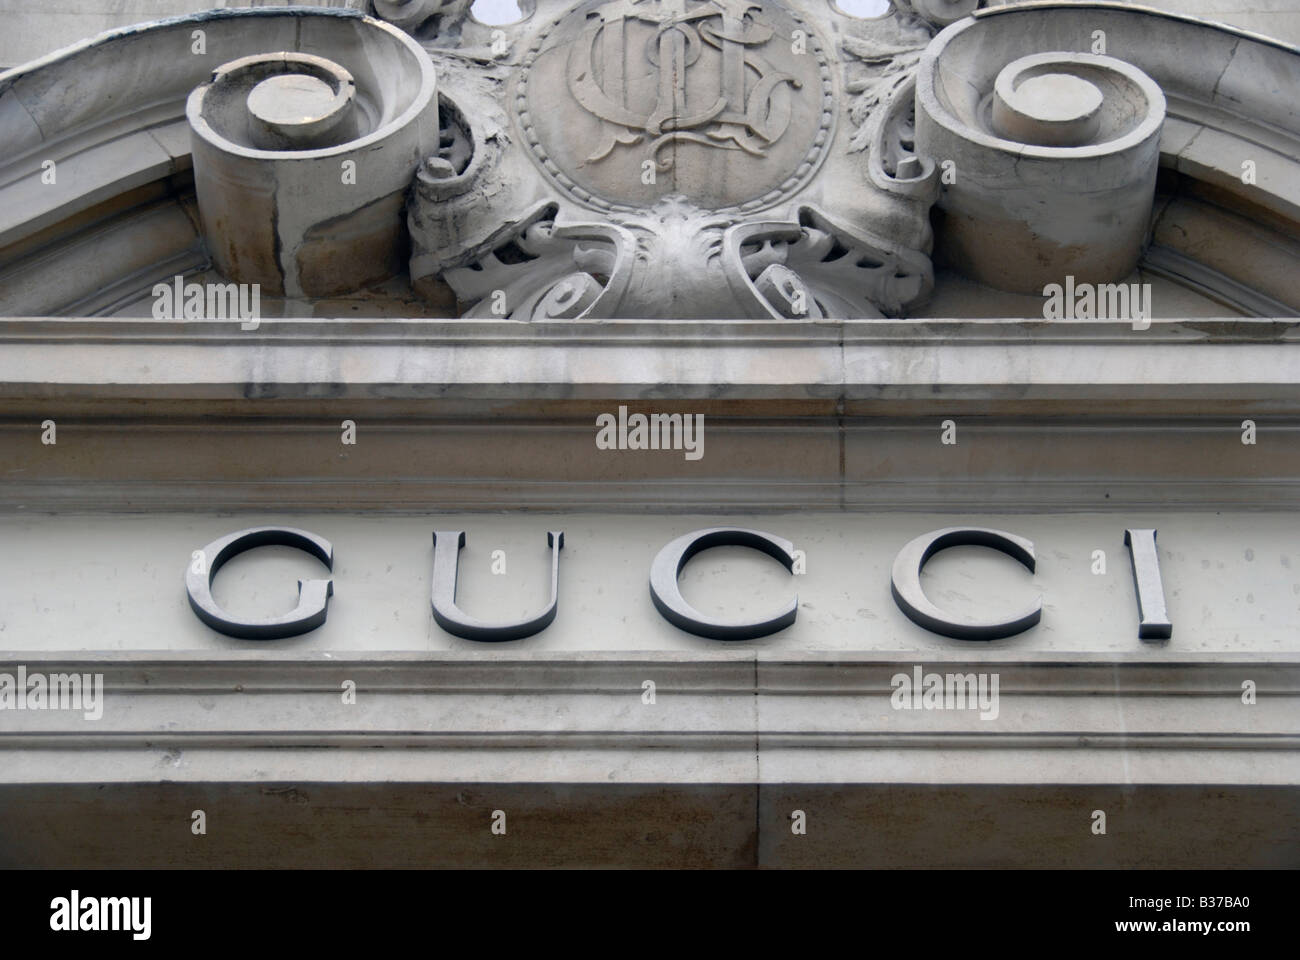 Gucci sign in Old Bond Street London England Stock Photo - Alamy